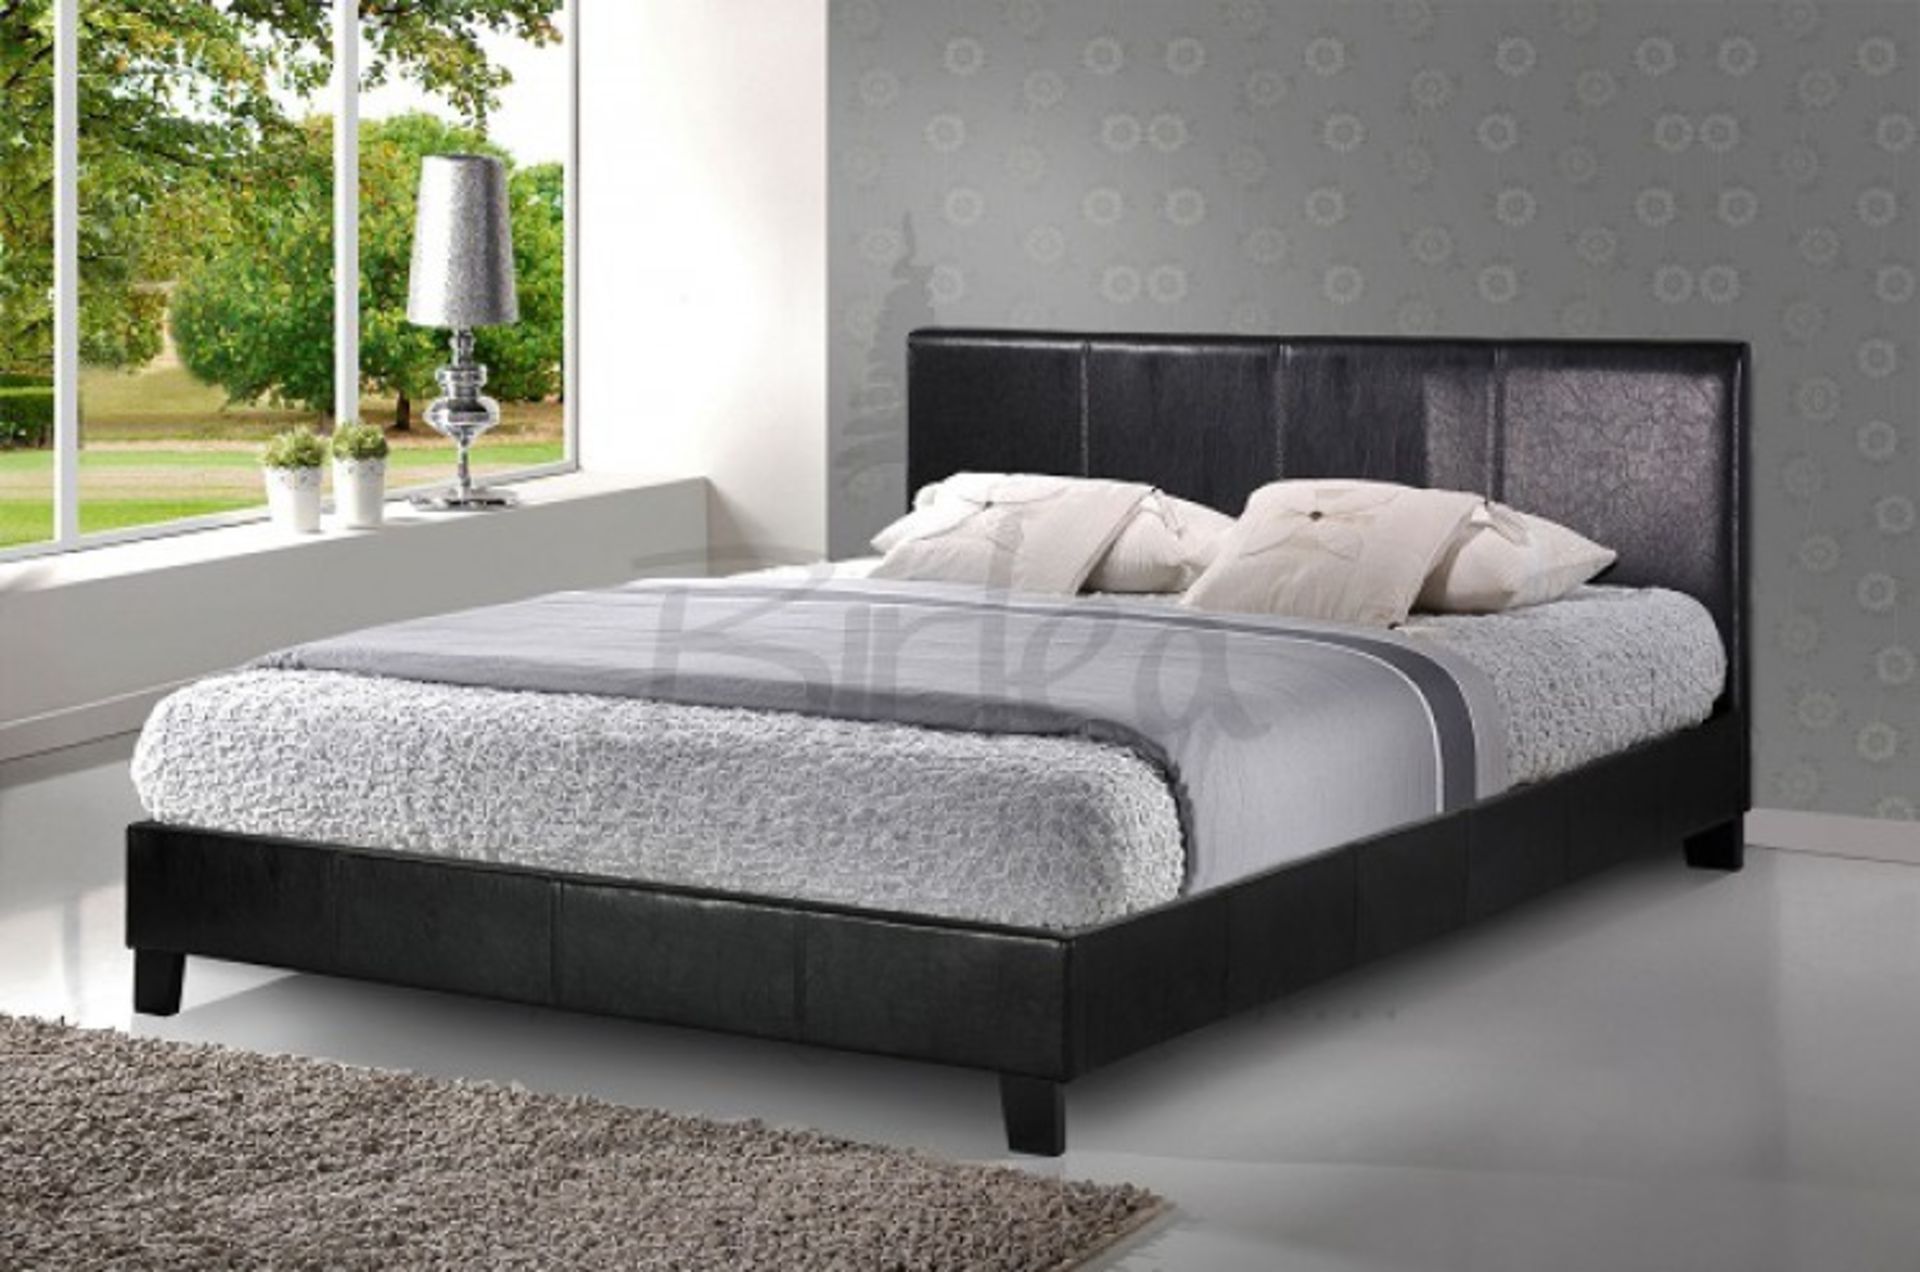 1 BRAND NEW BOXED BIRLEA BERLIN BLACK FAUX LEATHER 4FT 6" DOUBLE OTTOMAN BED RRP £179.99